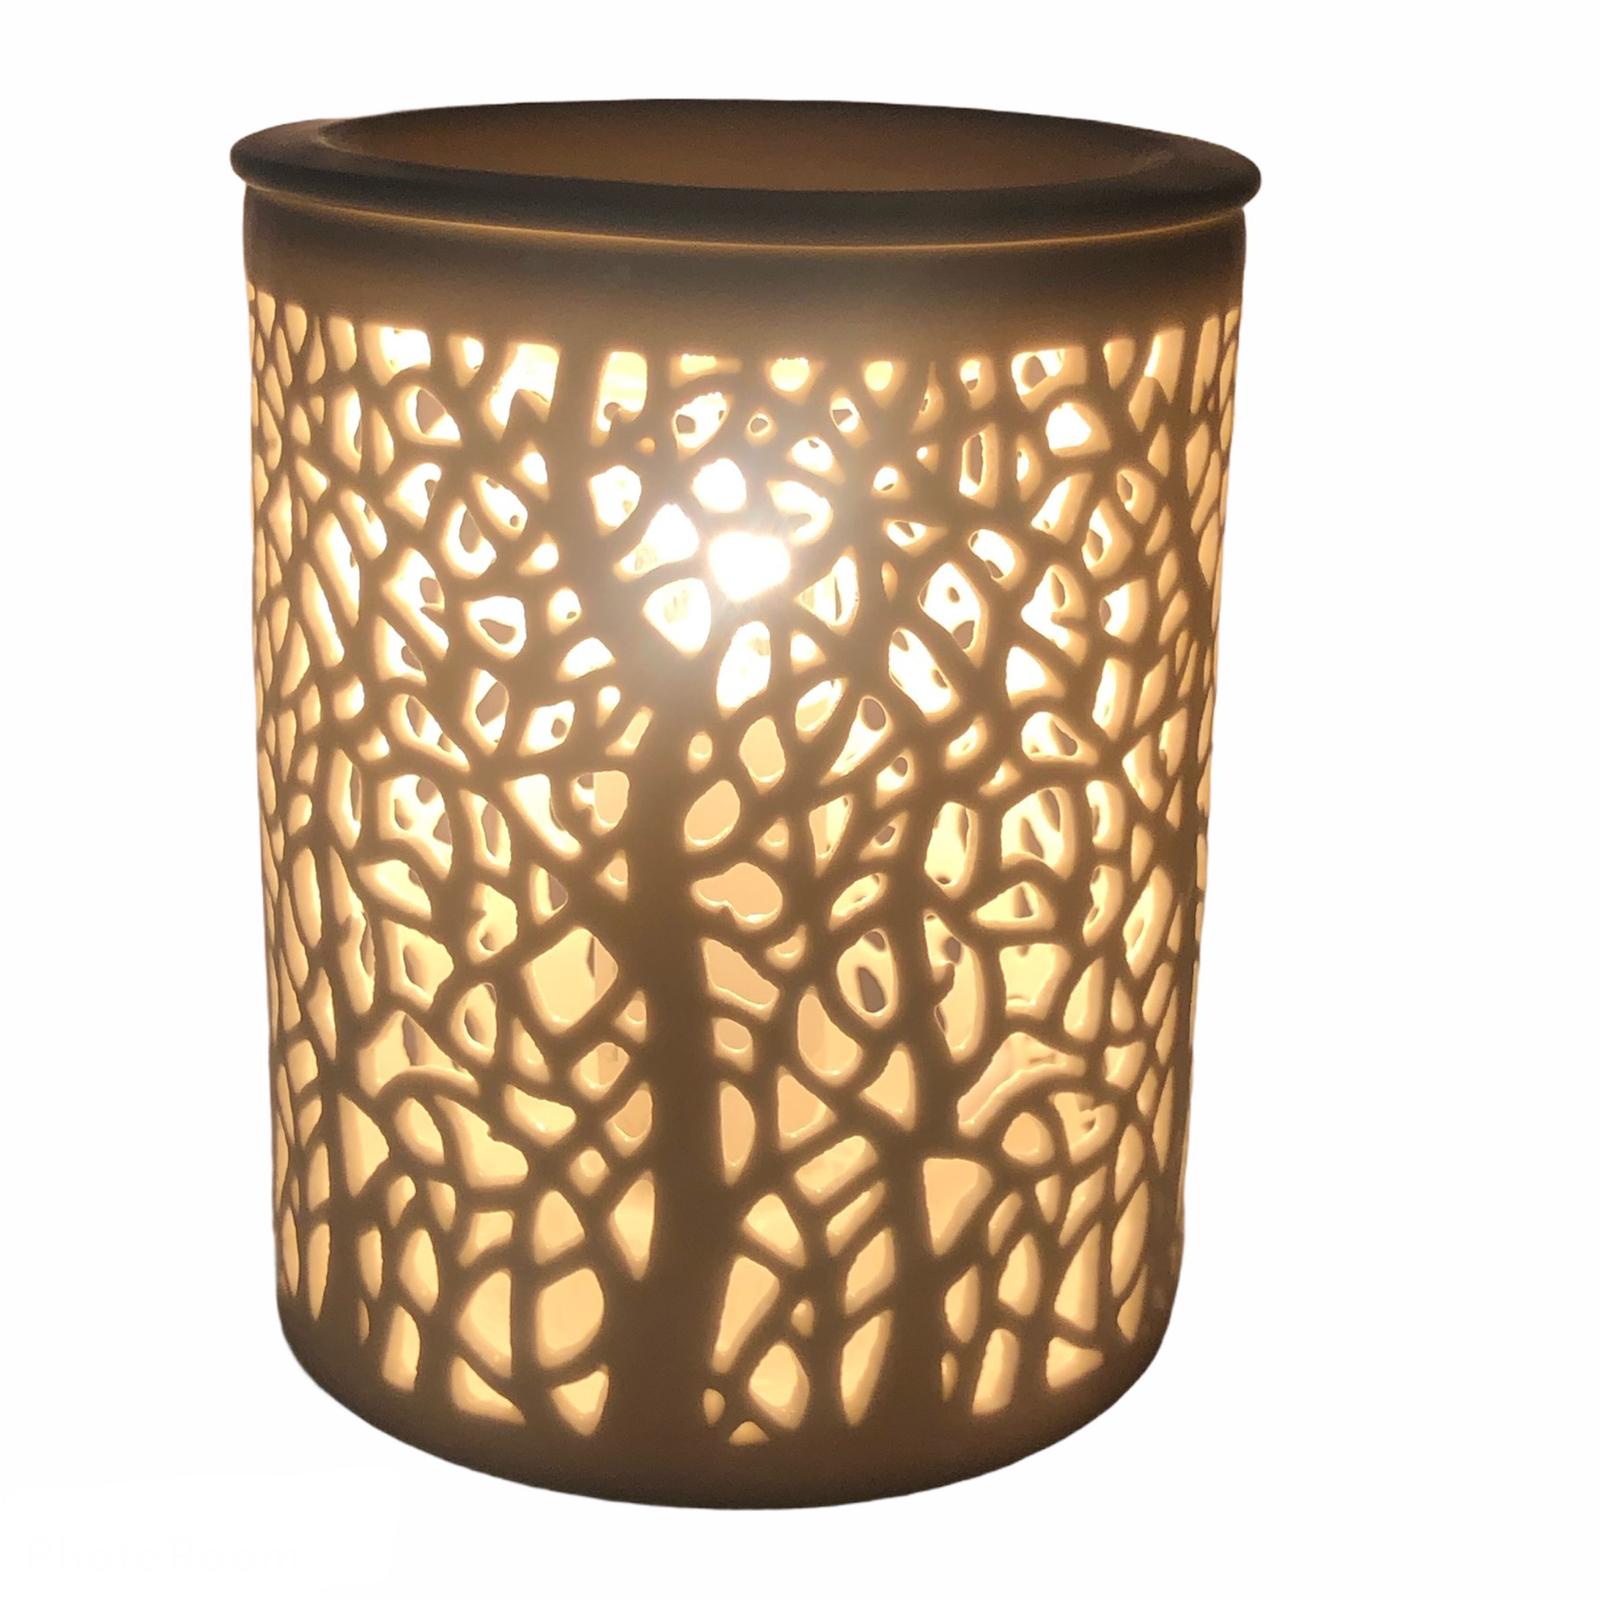 Tree Silhouette Electric Wax Burner / Melter